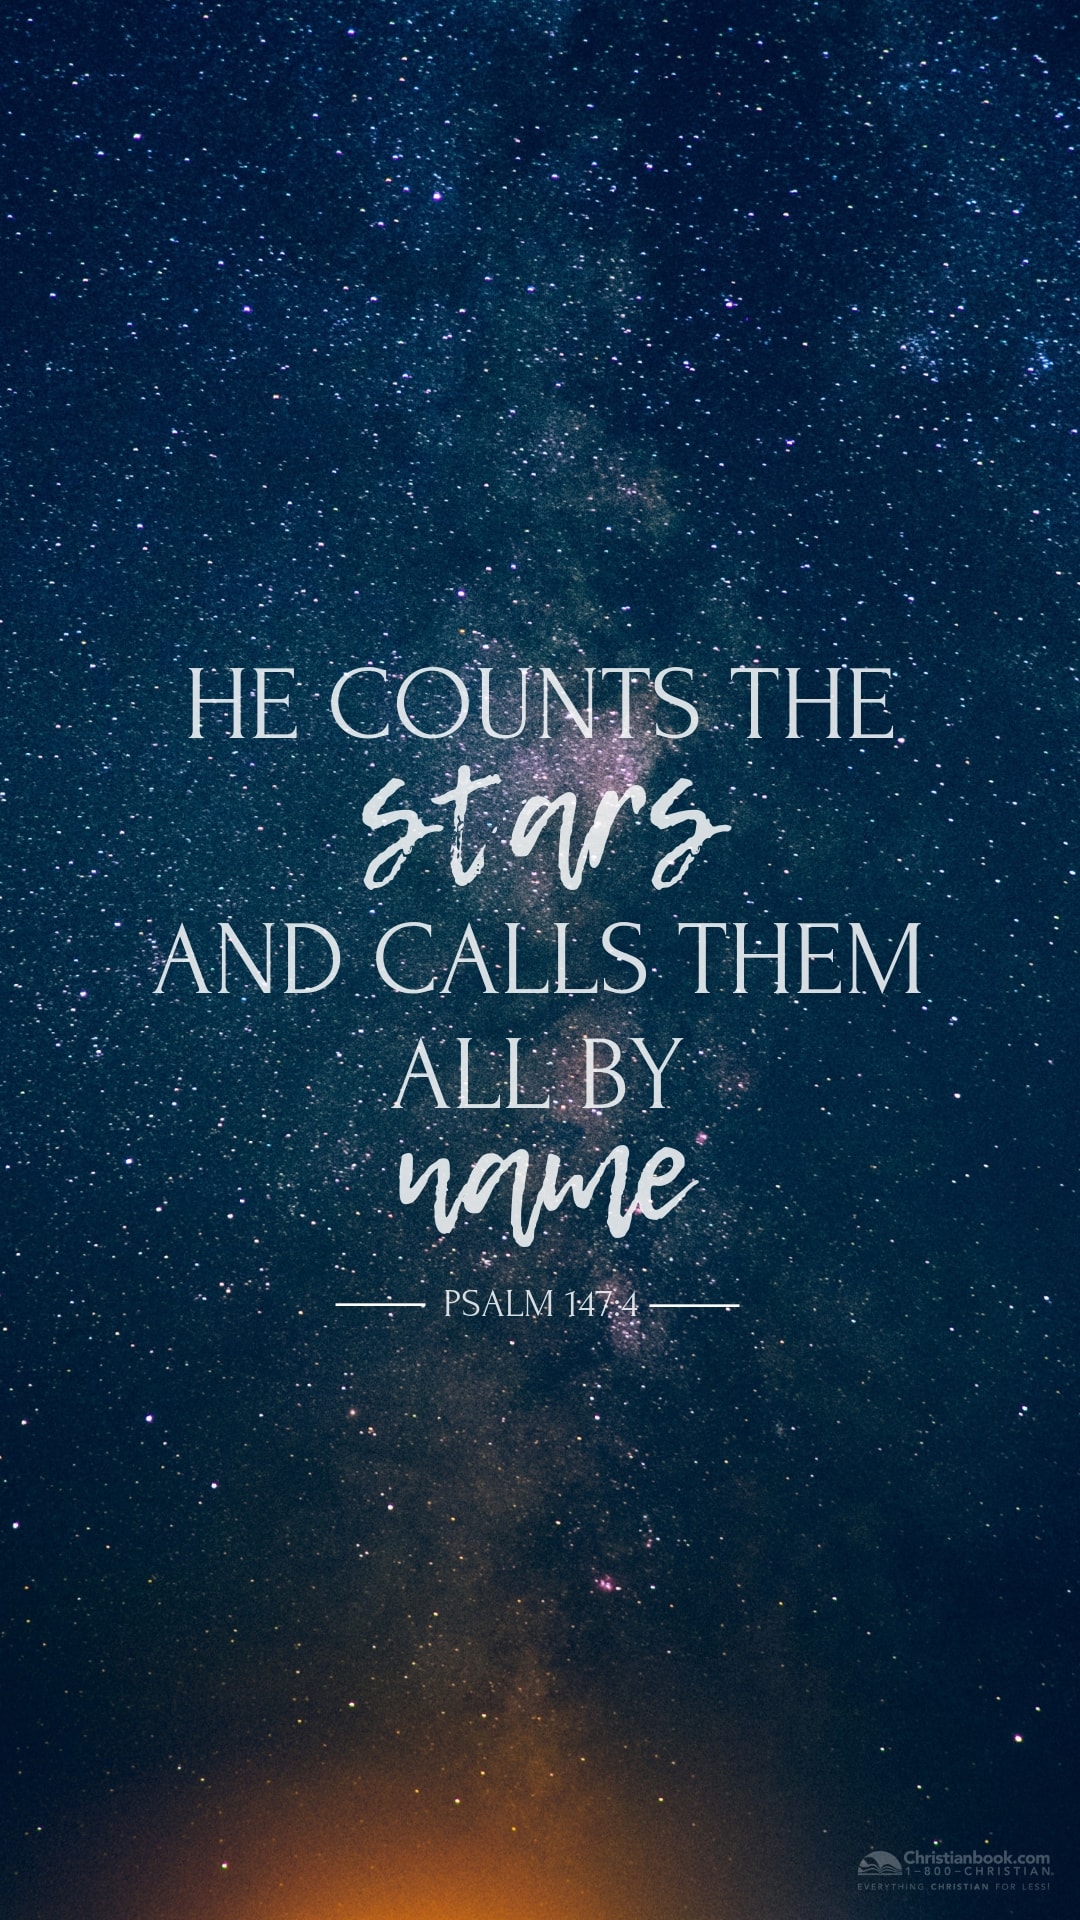 Christian Wallpaper Android, Awesome Wallpaper Android, - He Counts The Stars And Calls Them , HD Wallpaper & Backgrounds